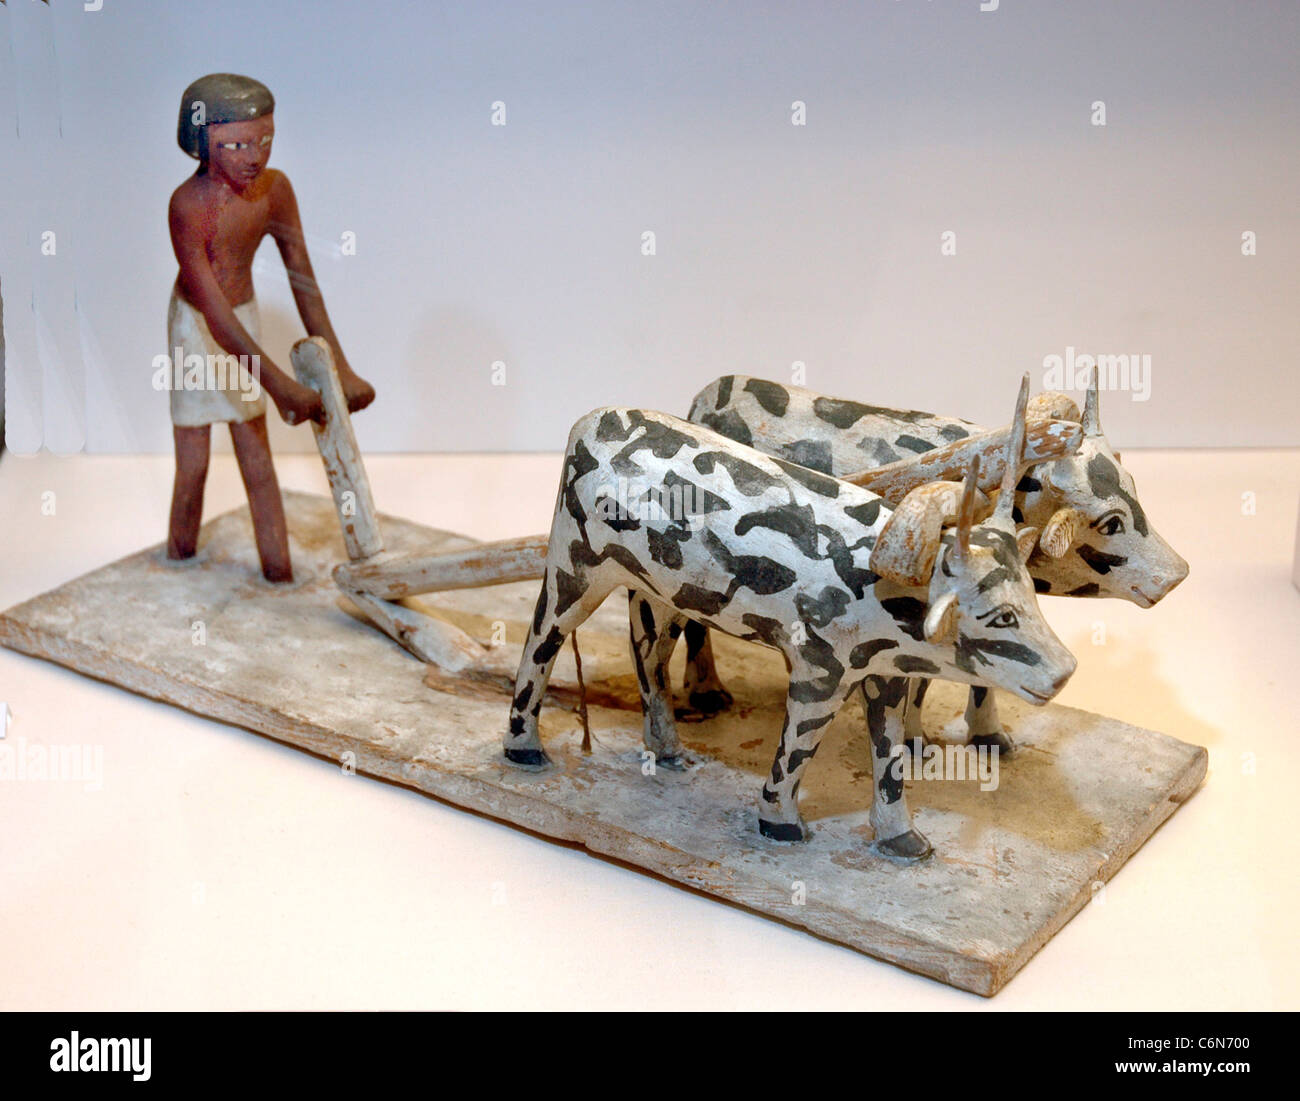 935. WOODEN MODEL OF PLOWING WITH A PAIR OF OXEN, SECOND MILLENNIUM B.C. Stock Photo